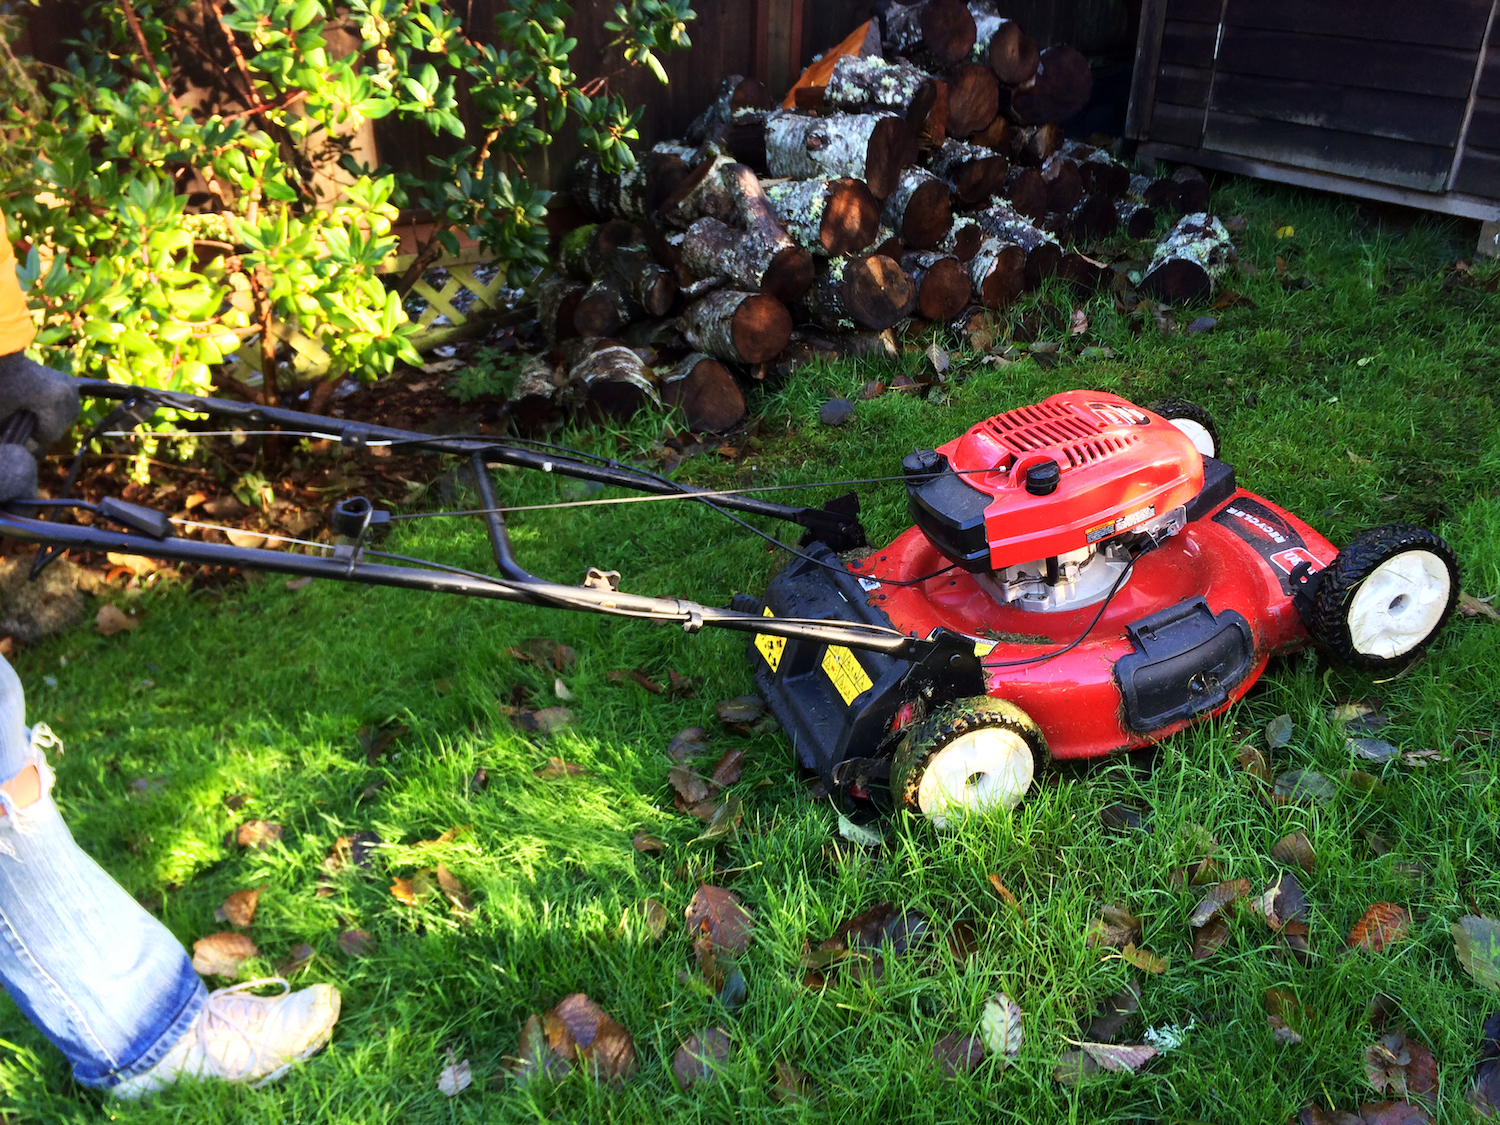 Mulching leaves with a red lawn mower